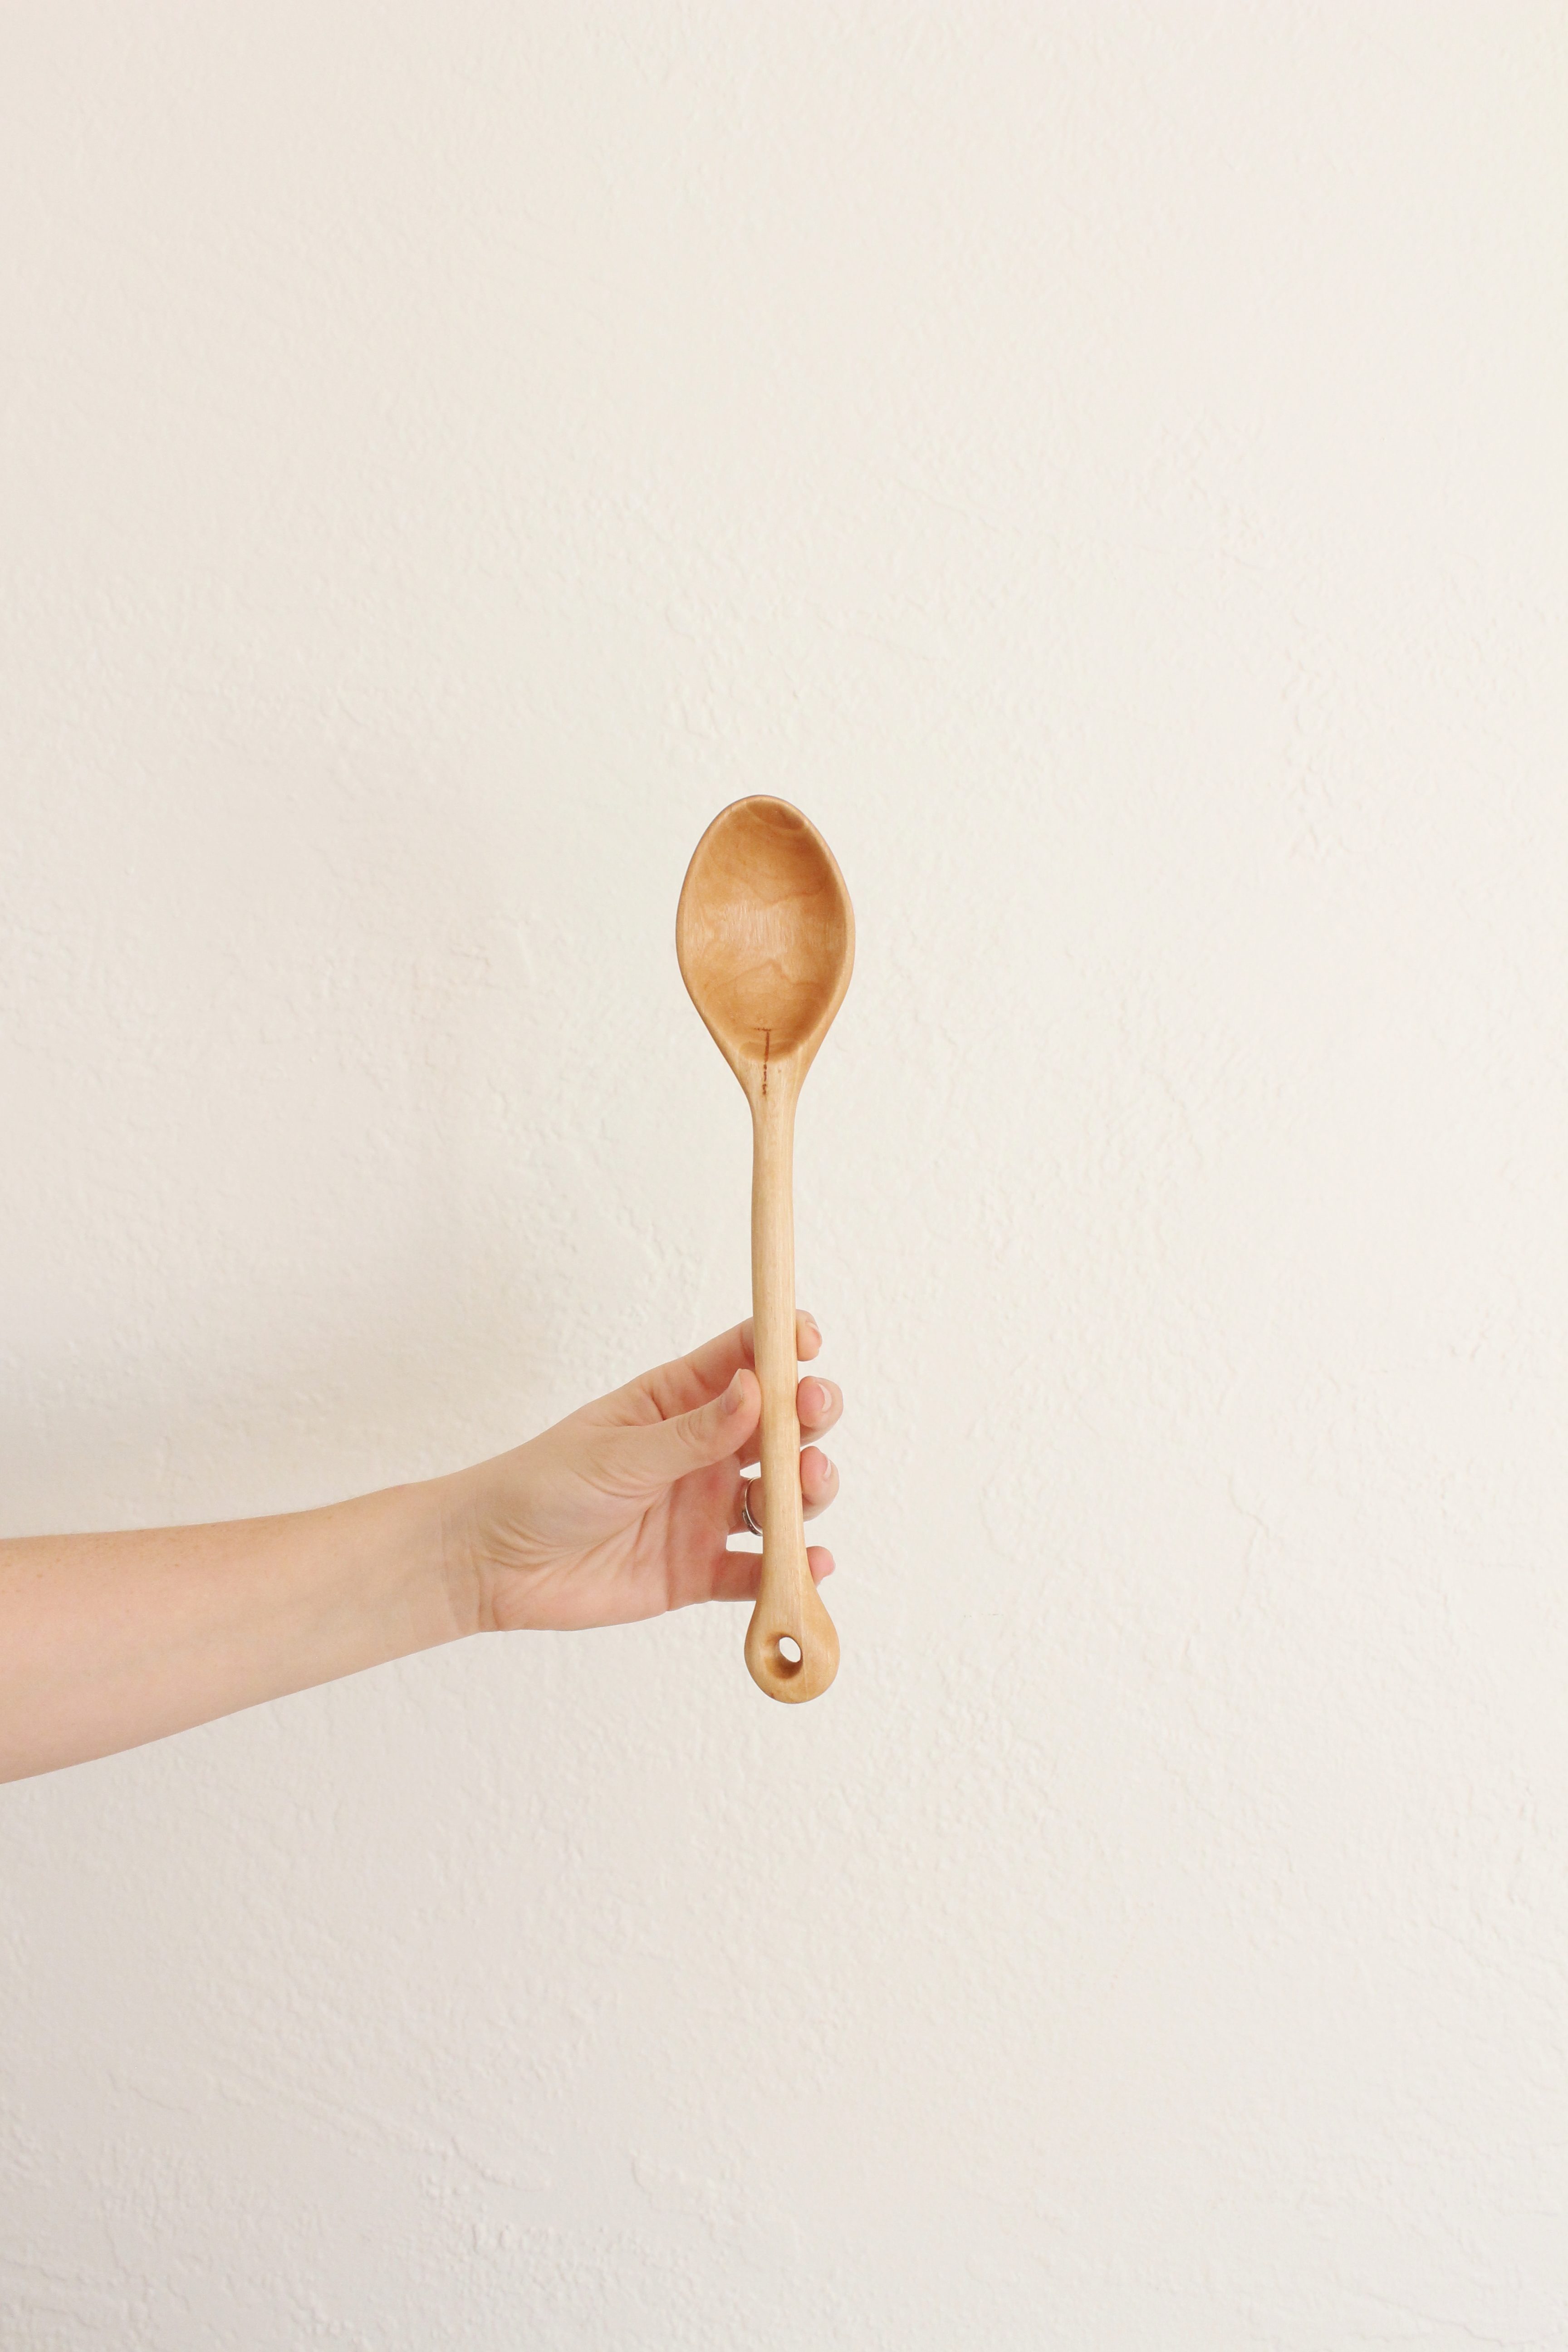 spoon carving wooden spoon